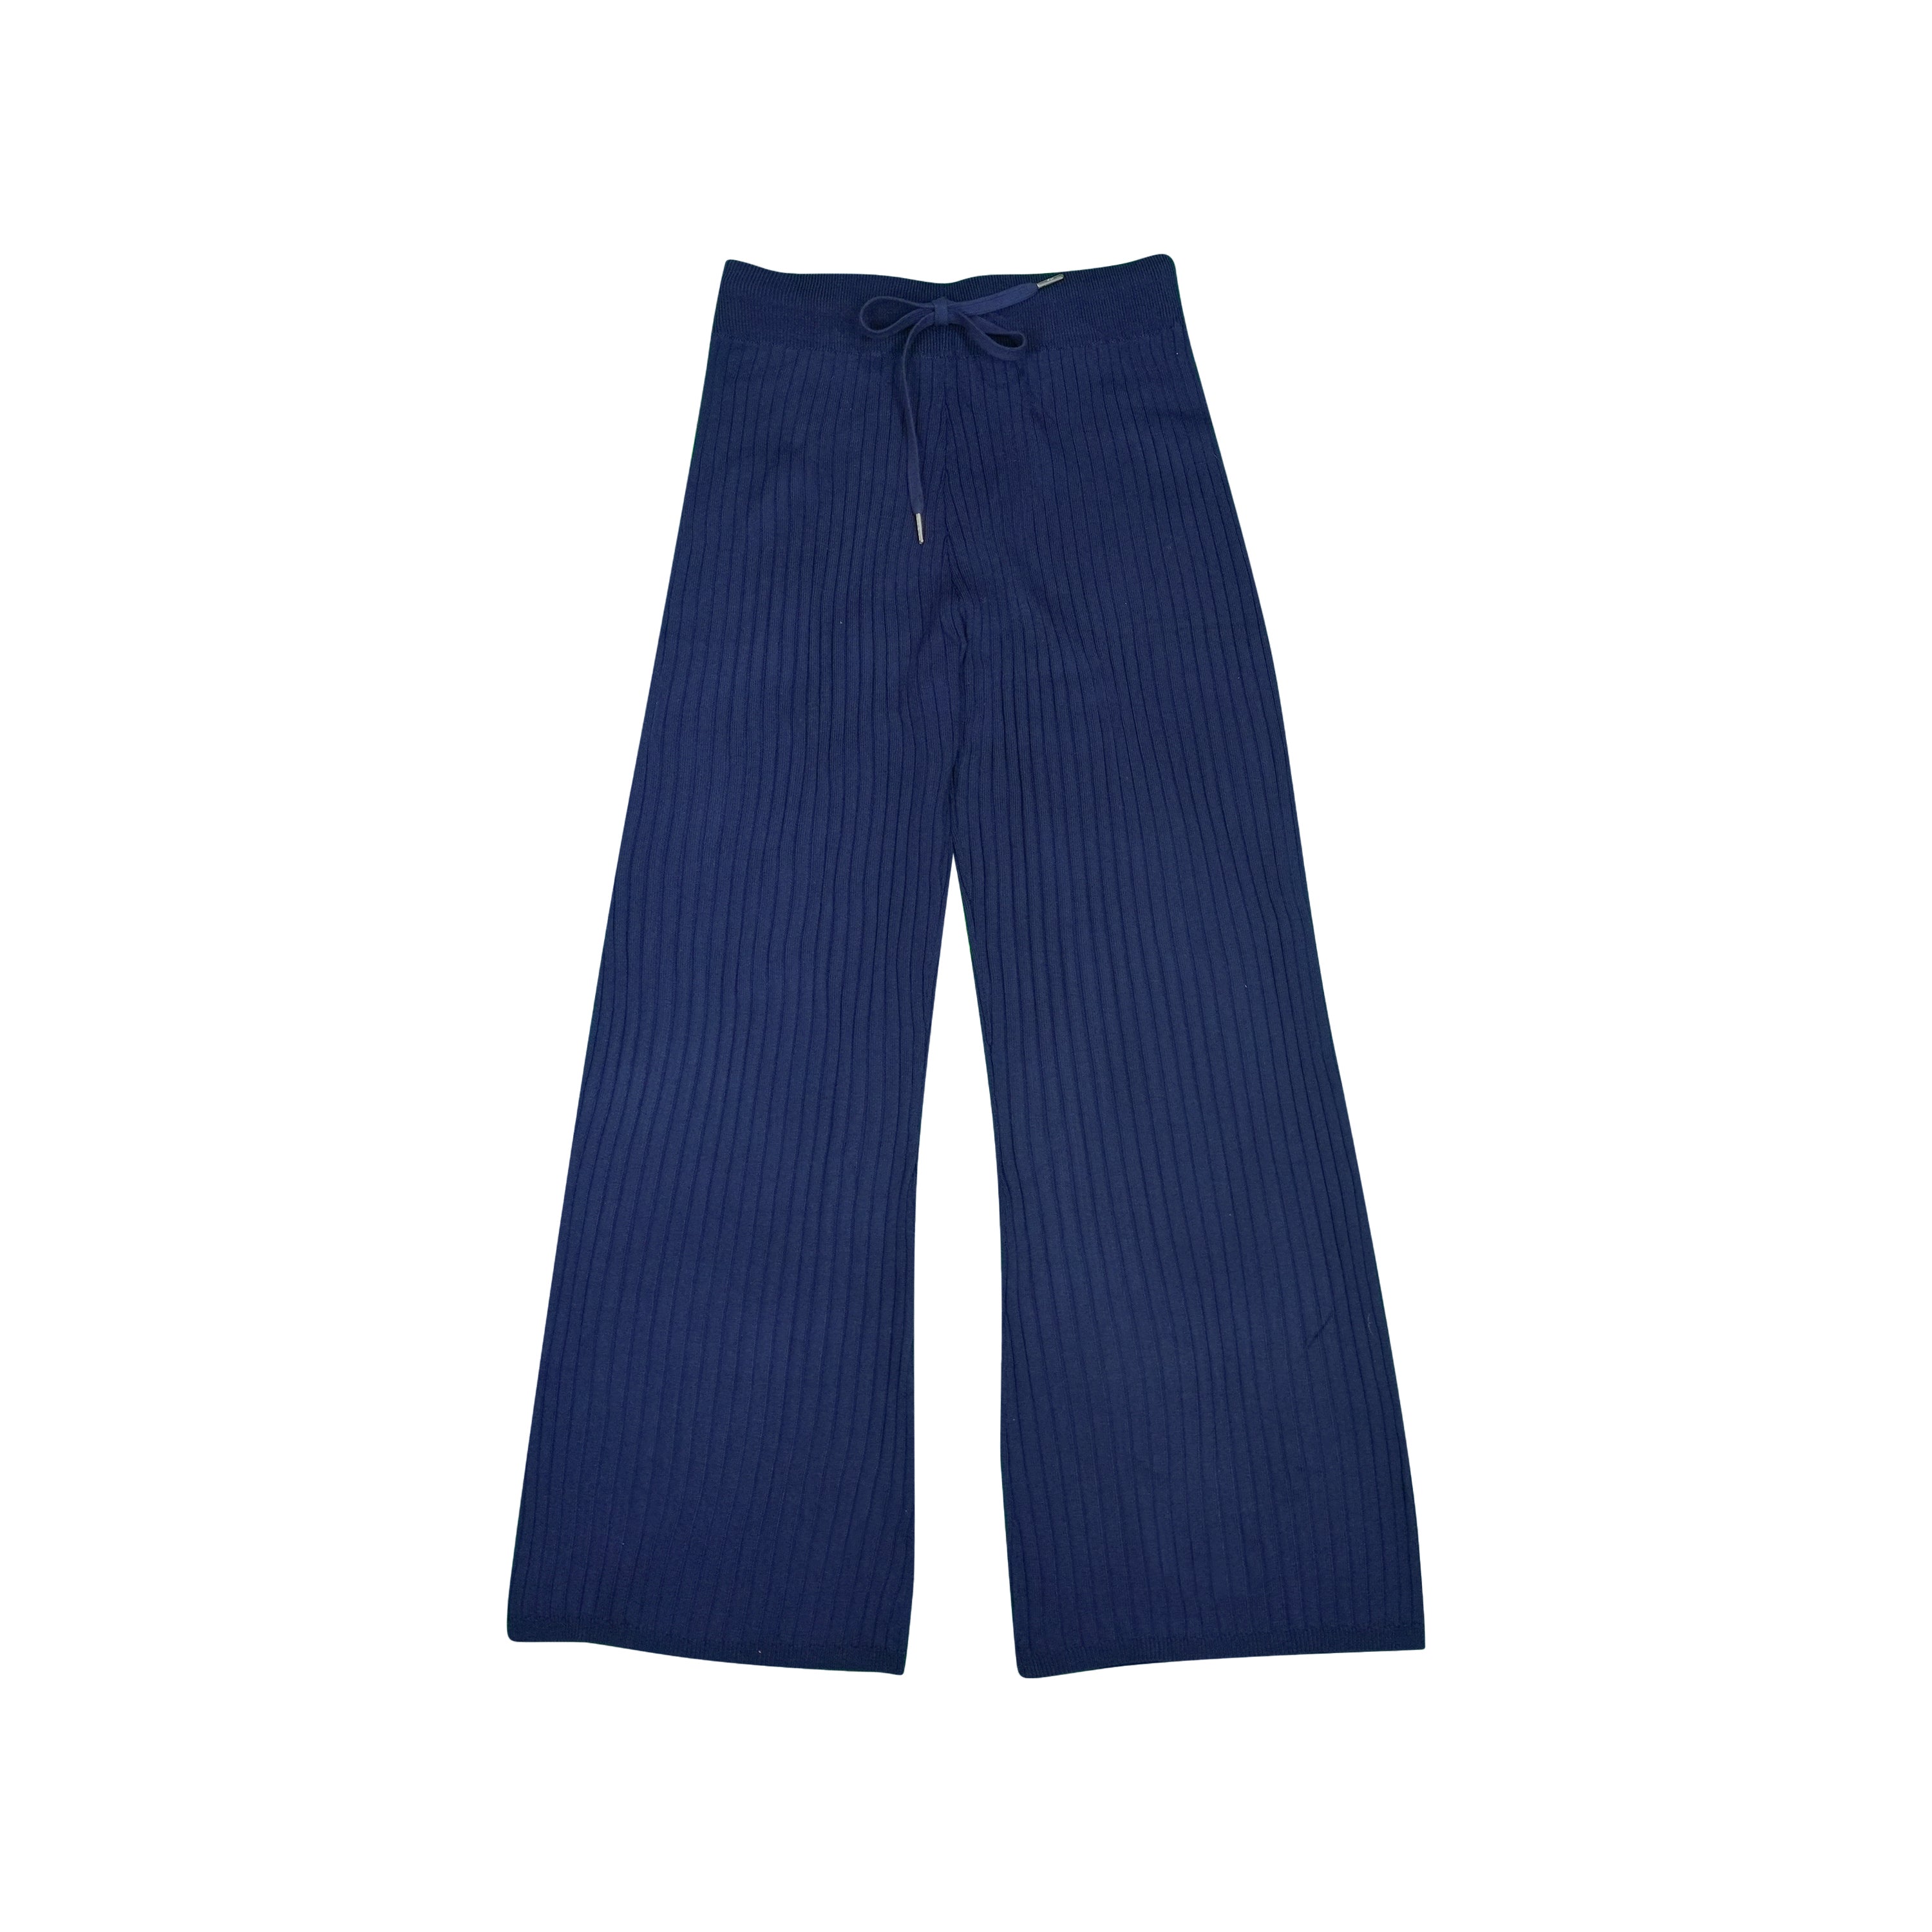 Ribbed Knit Pants - Midnight Blue